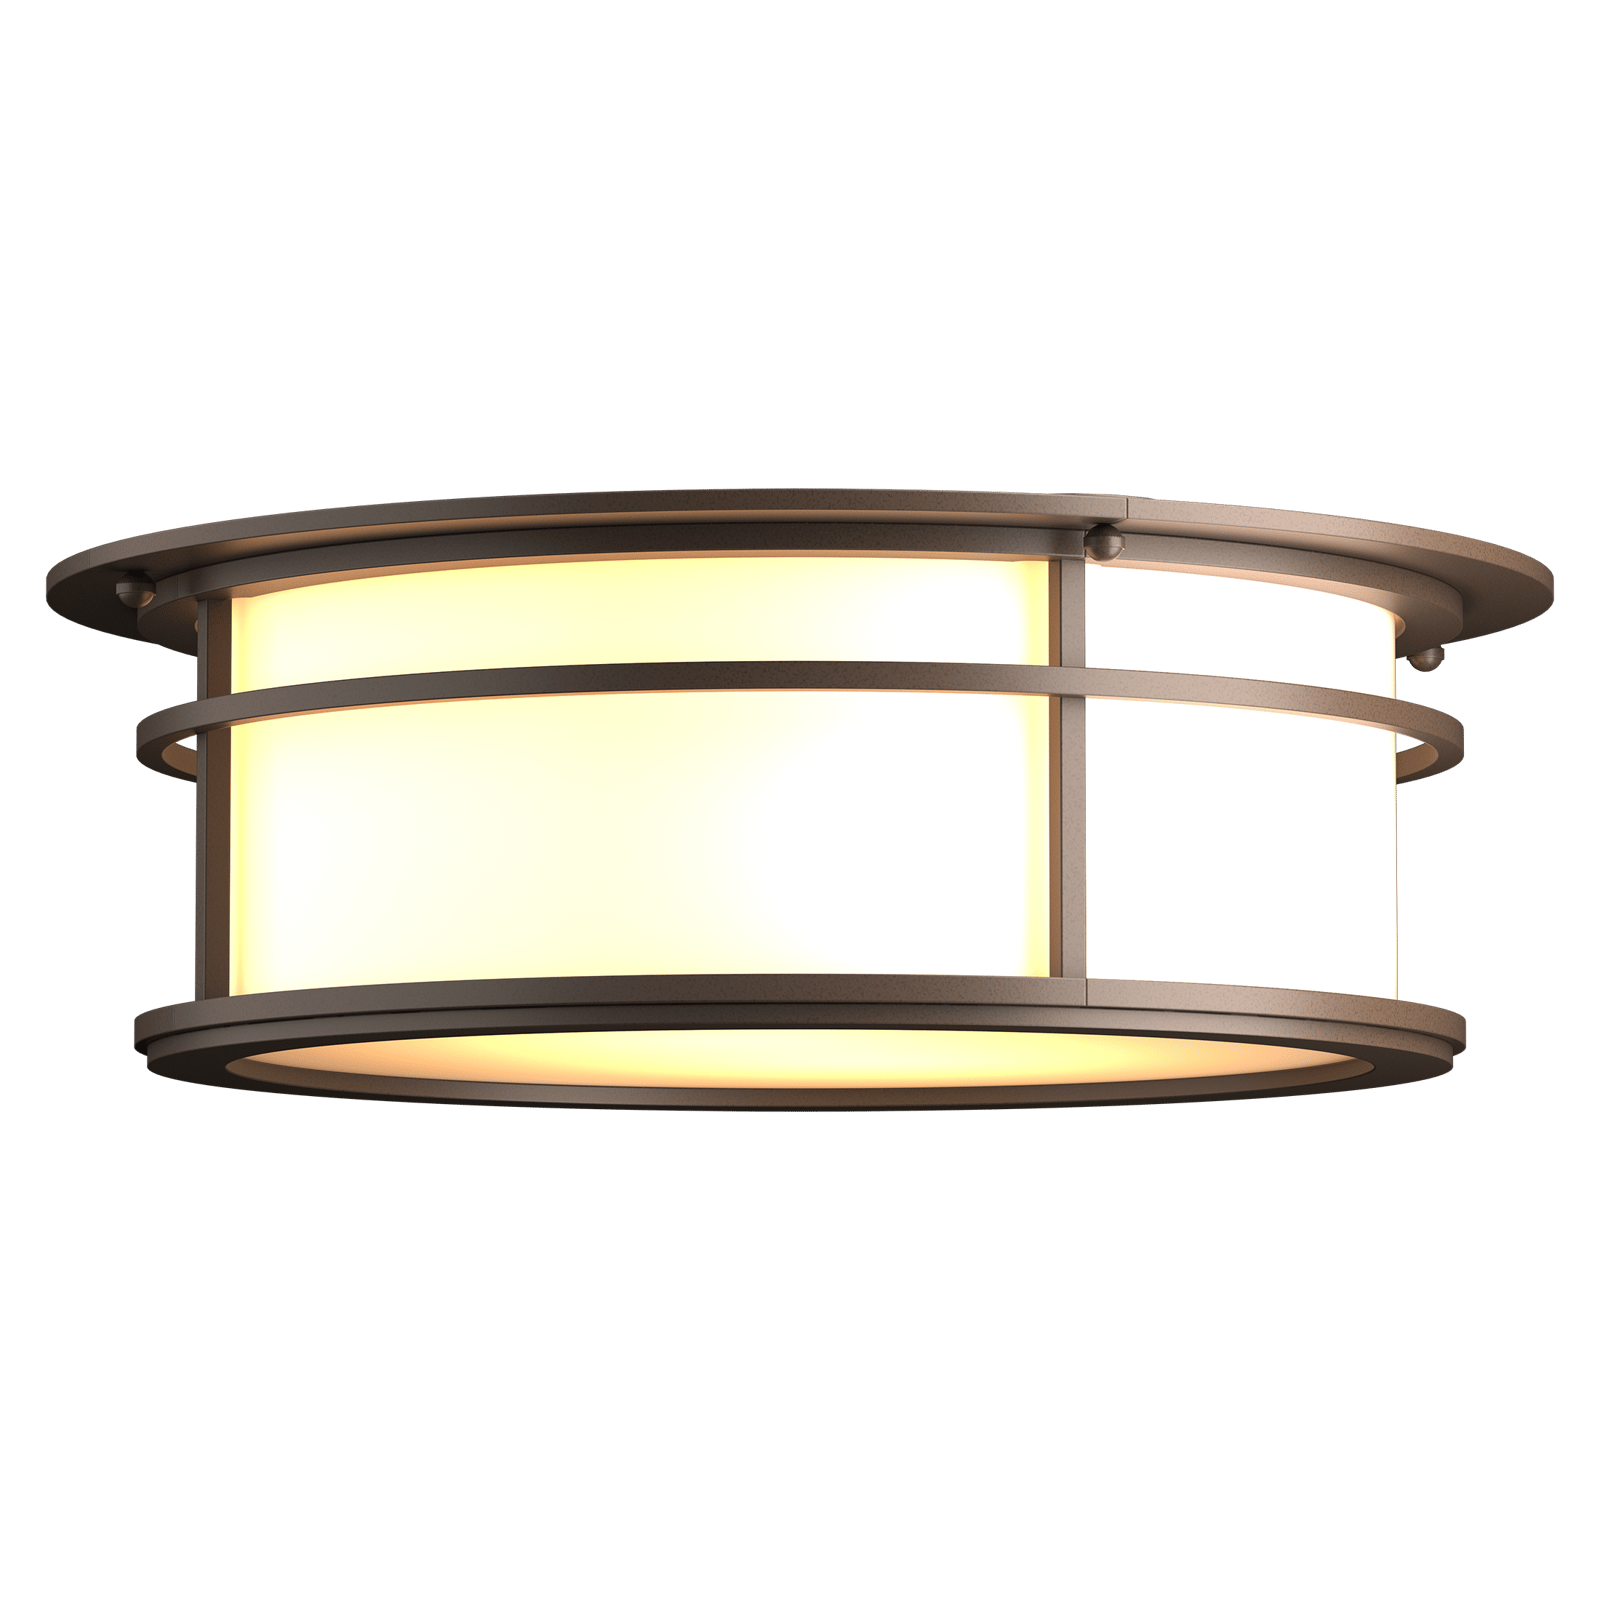 Hubbardton Forge Province Outdoor Flush Mount Outdoor l Wall Hubbardton Forge Coastal Bronze Opal Glass (GG) 